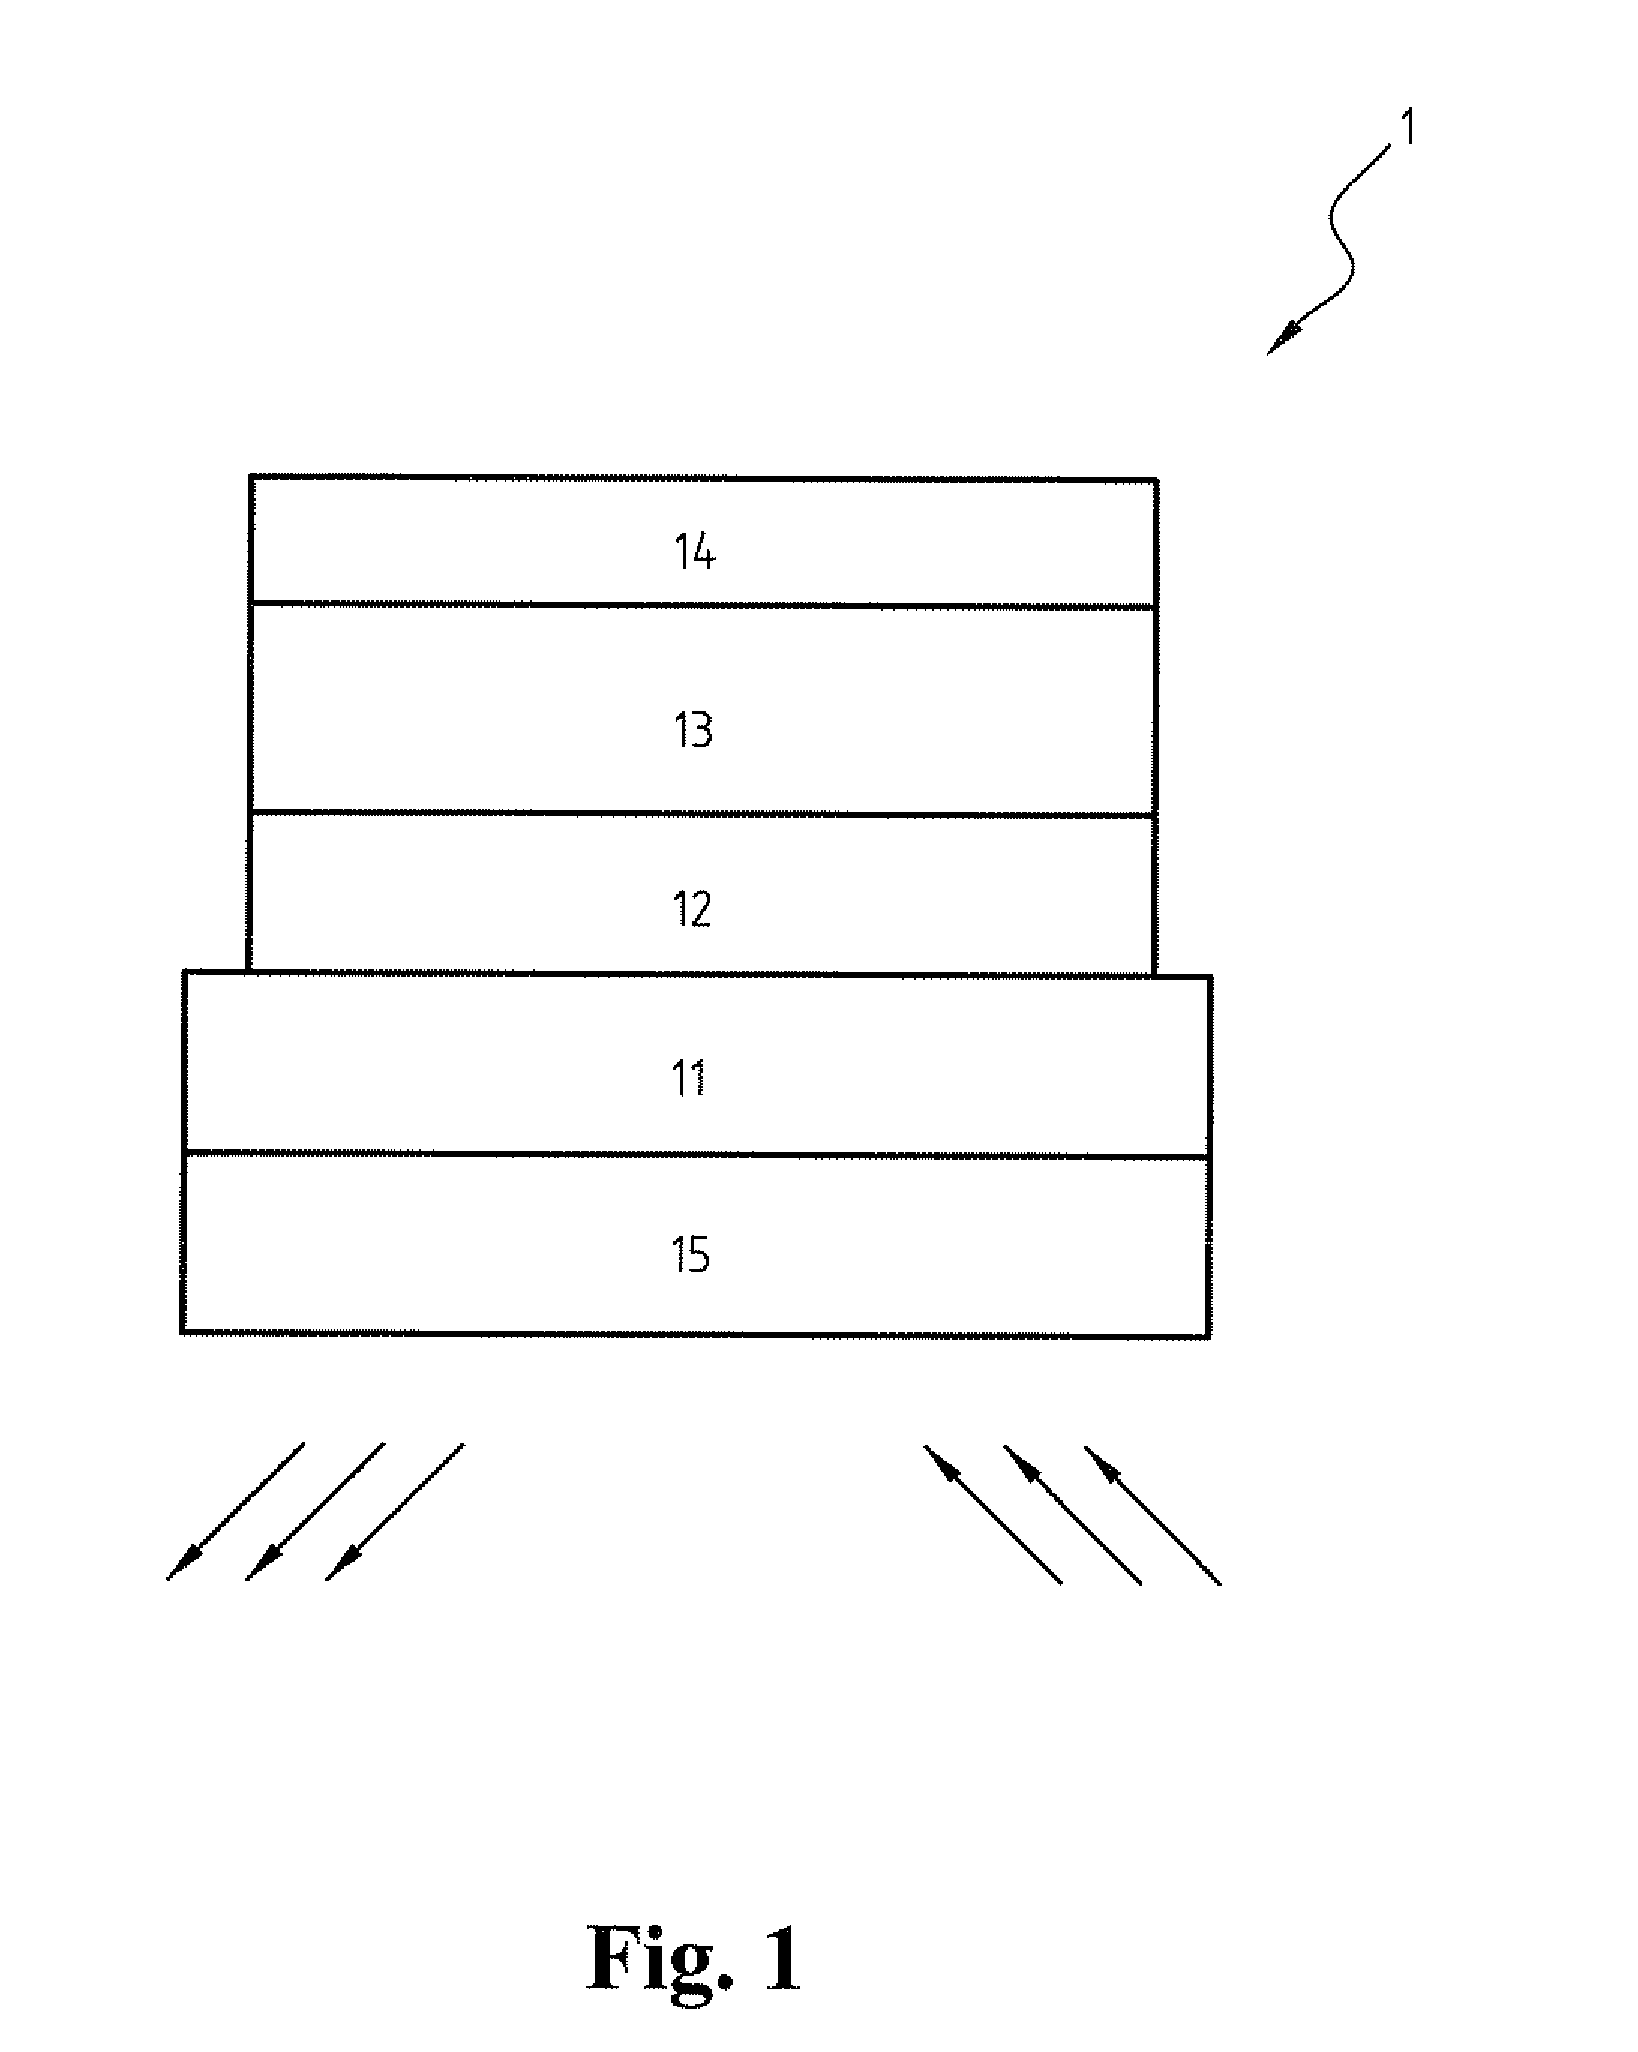 One-piece organic light emitting diode display device with an energy-recycling feature and high contrast